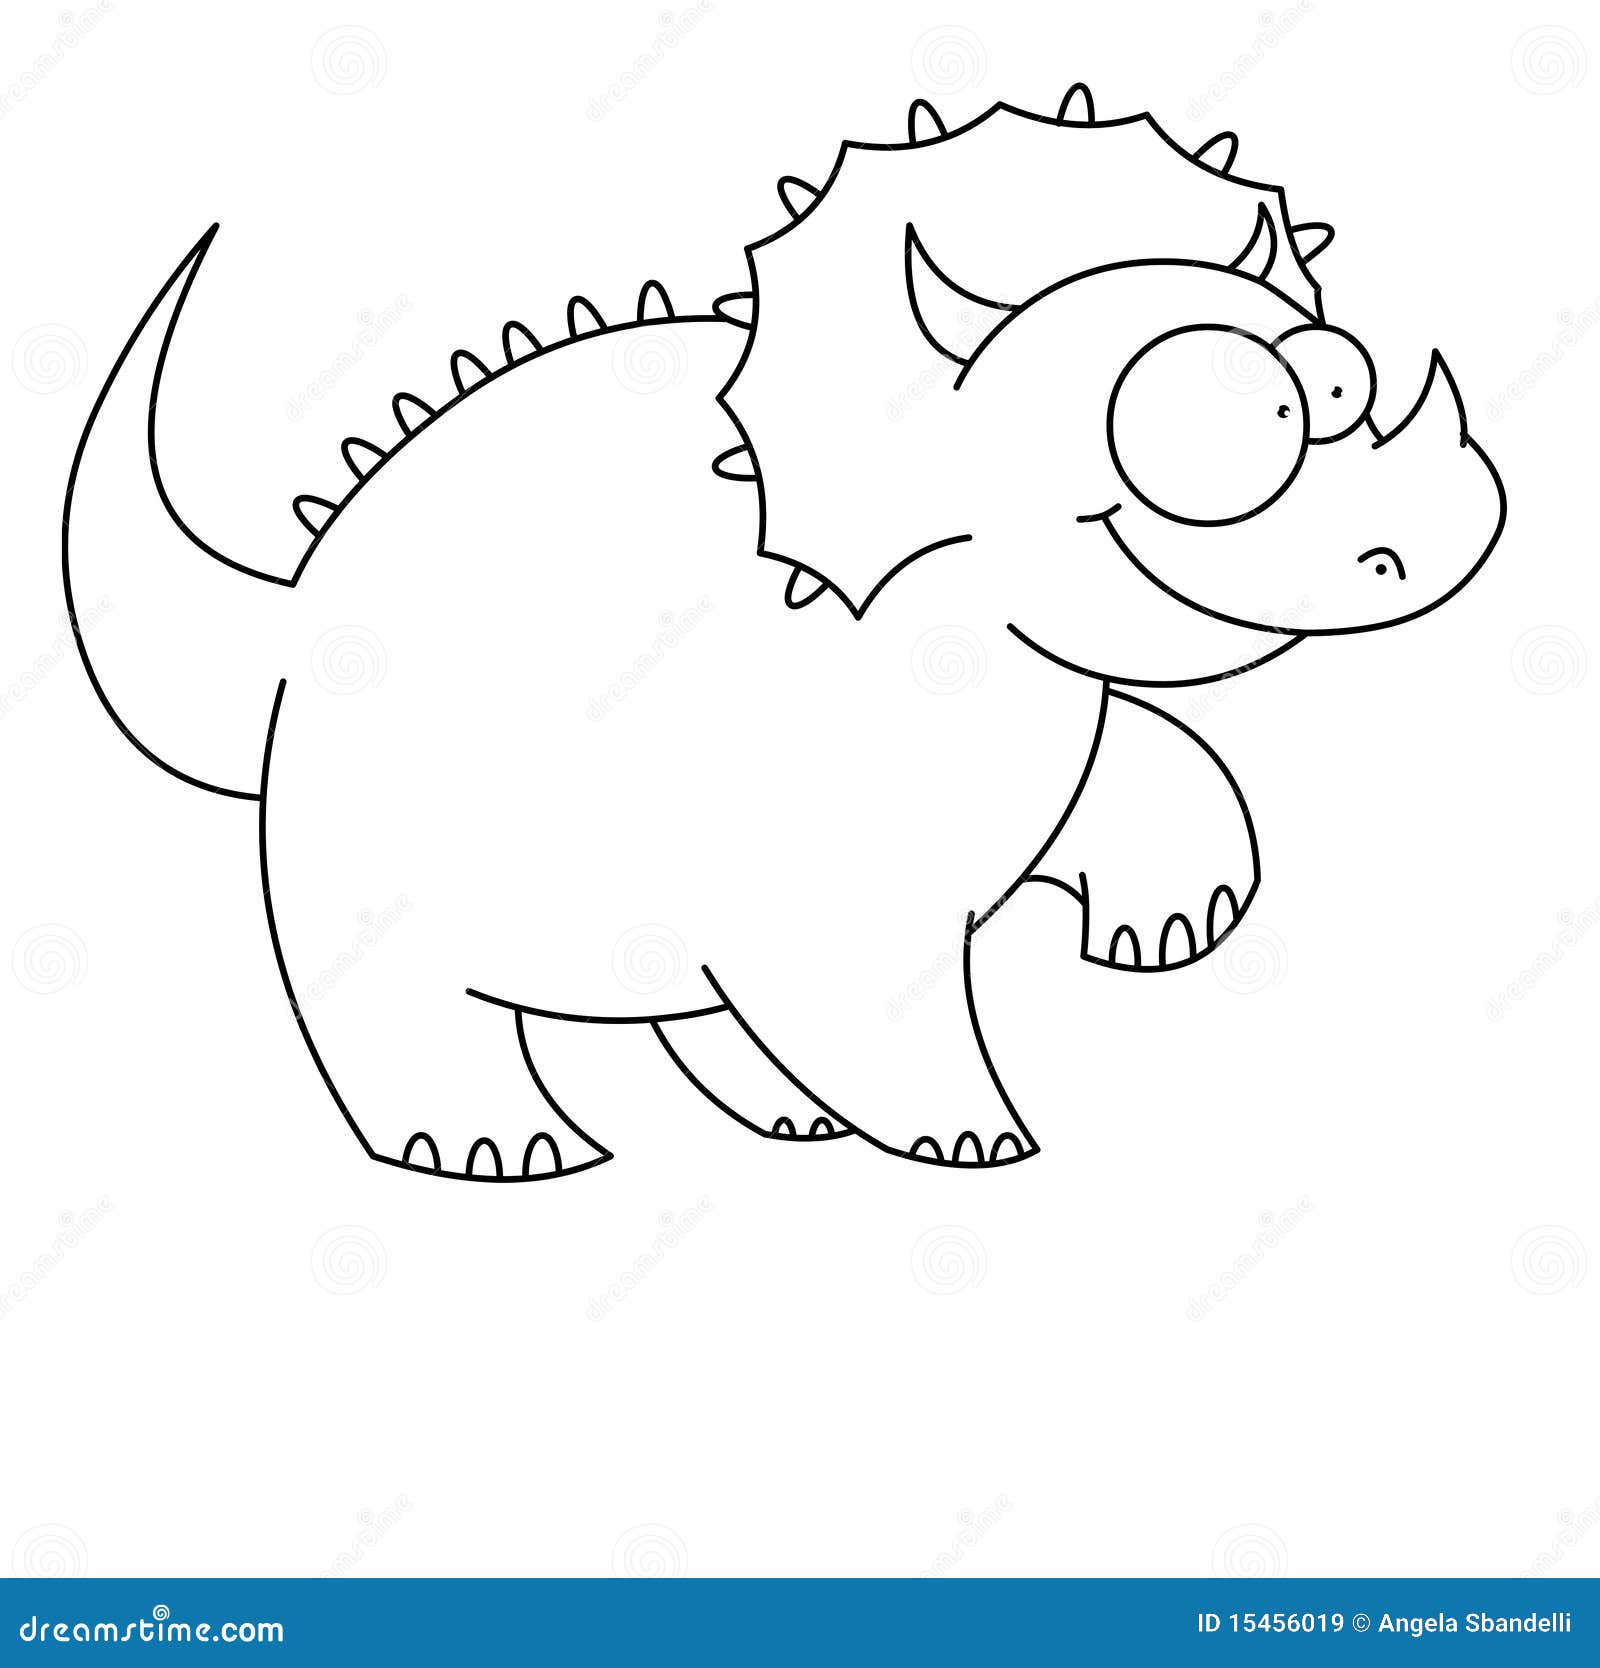 free black and white clipart of dinosaurs - photo #37